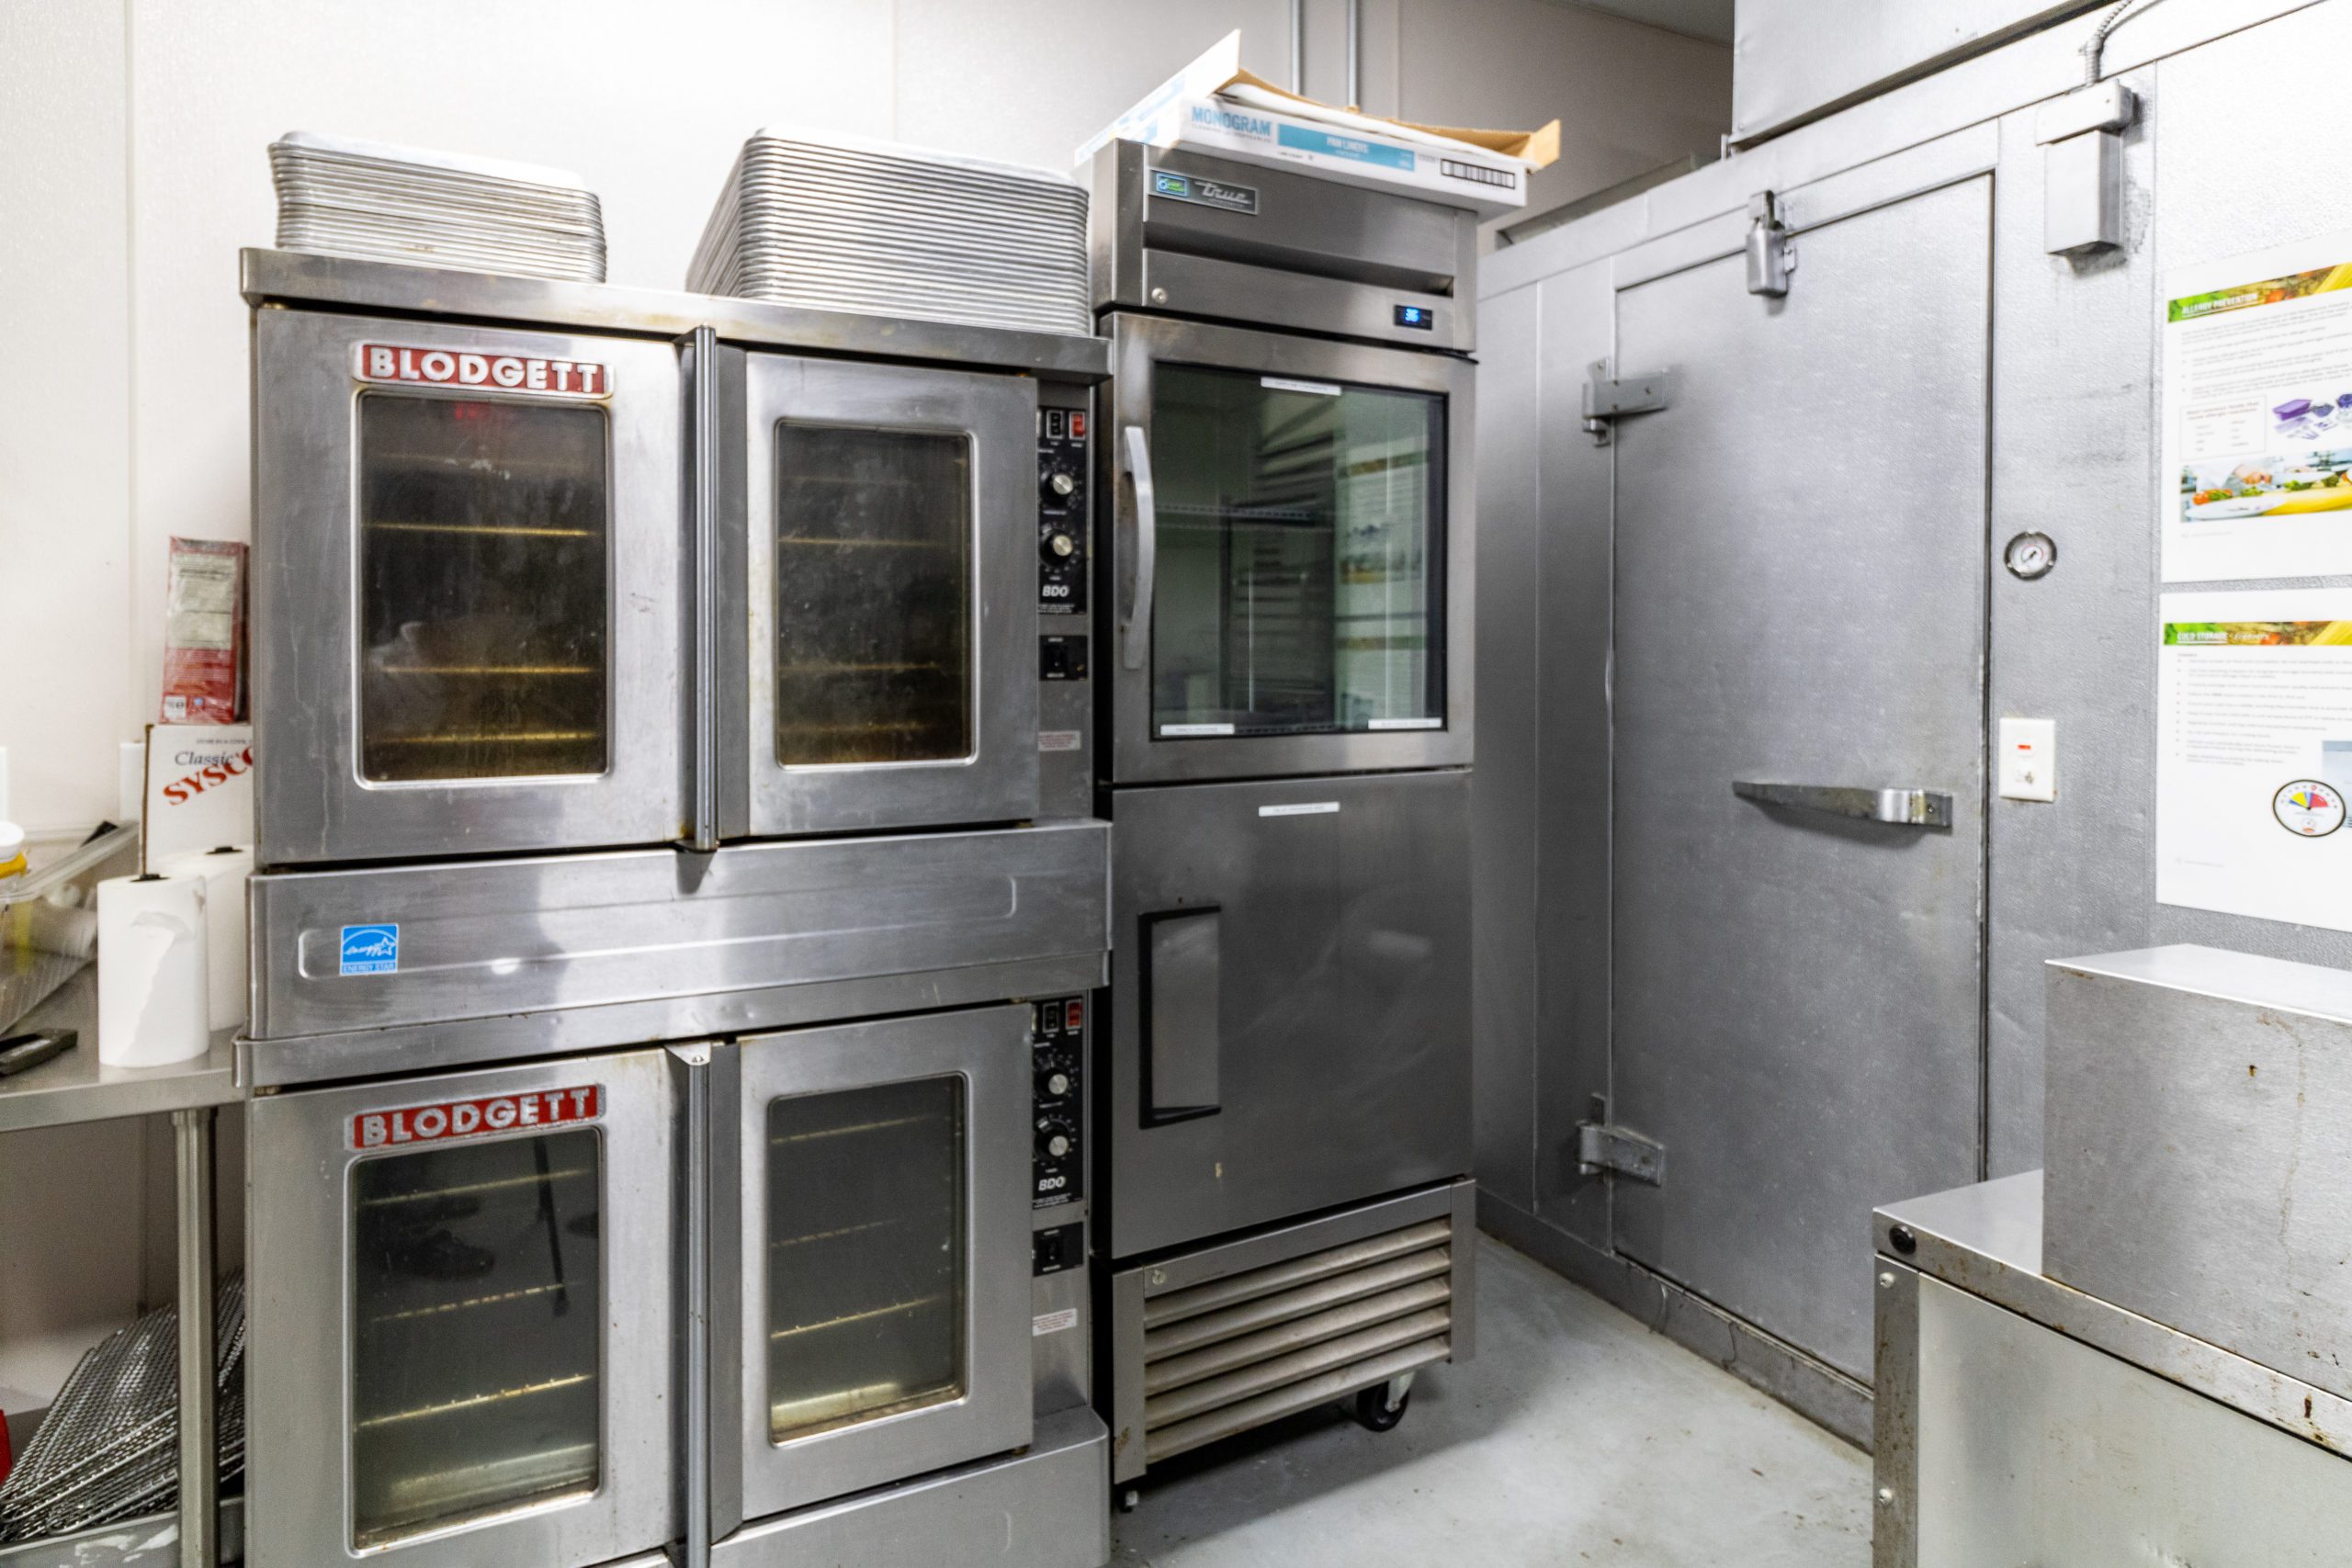 Commercial ovens and entrance to a walk-in cooler/freezer.